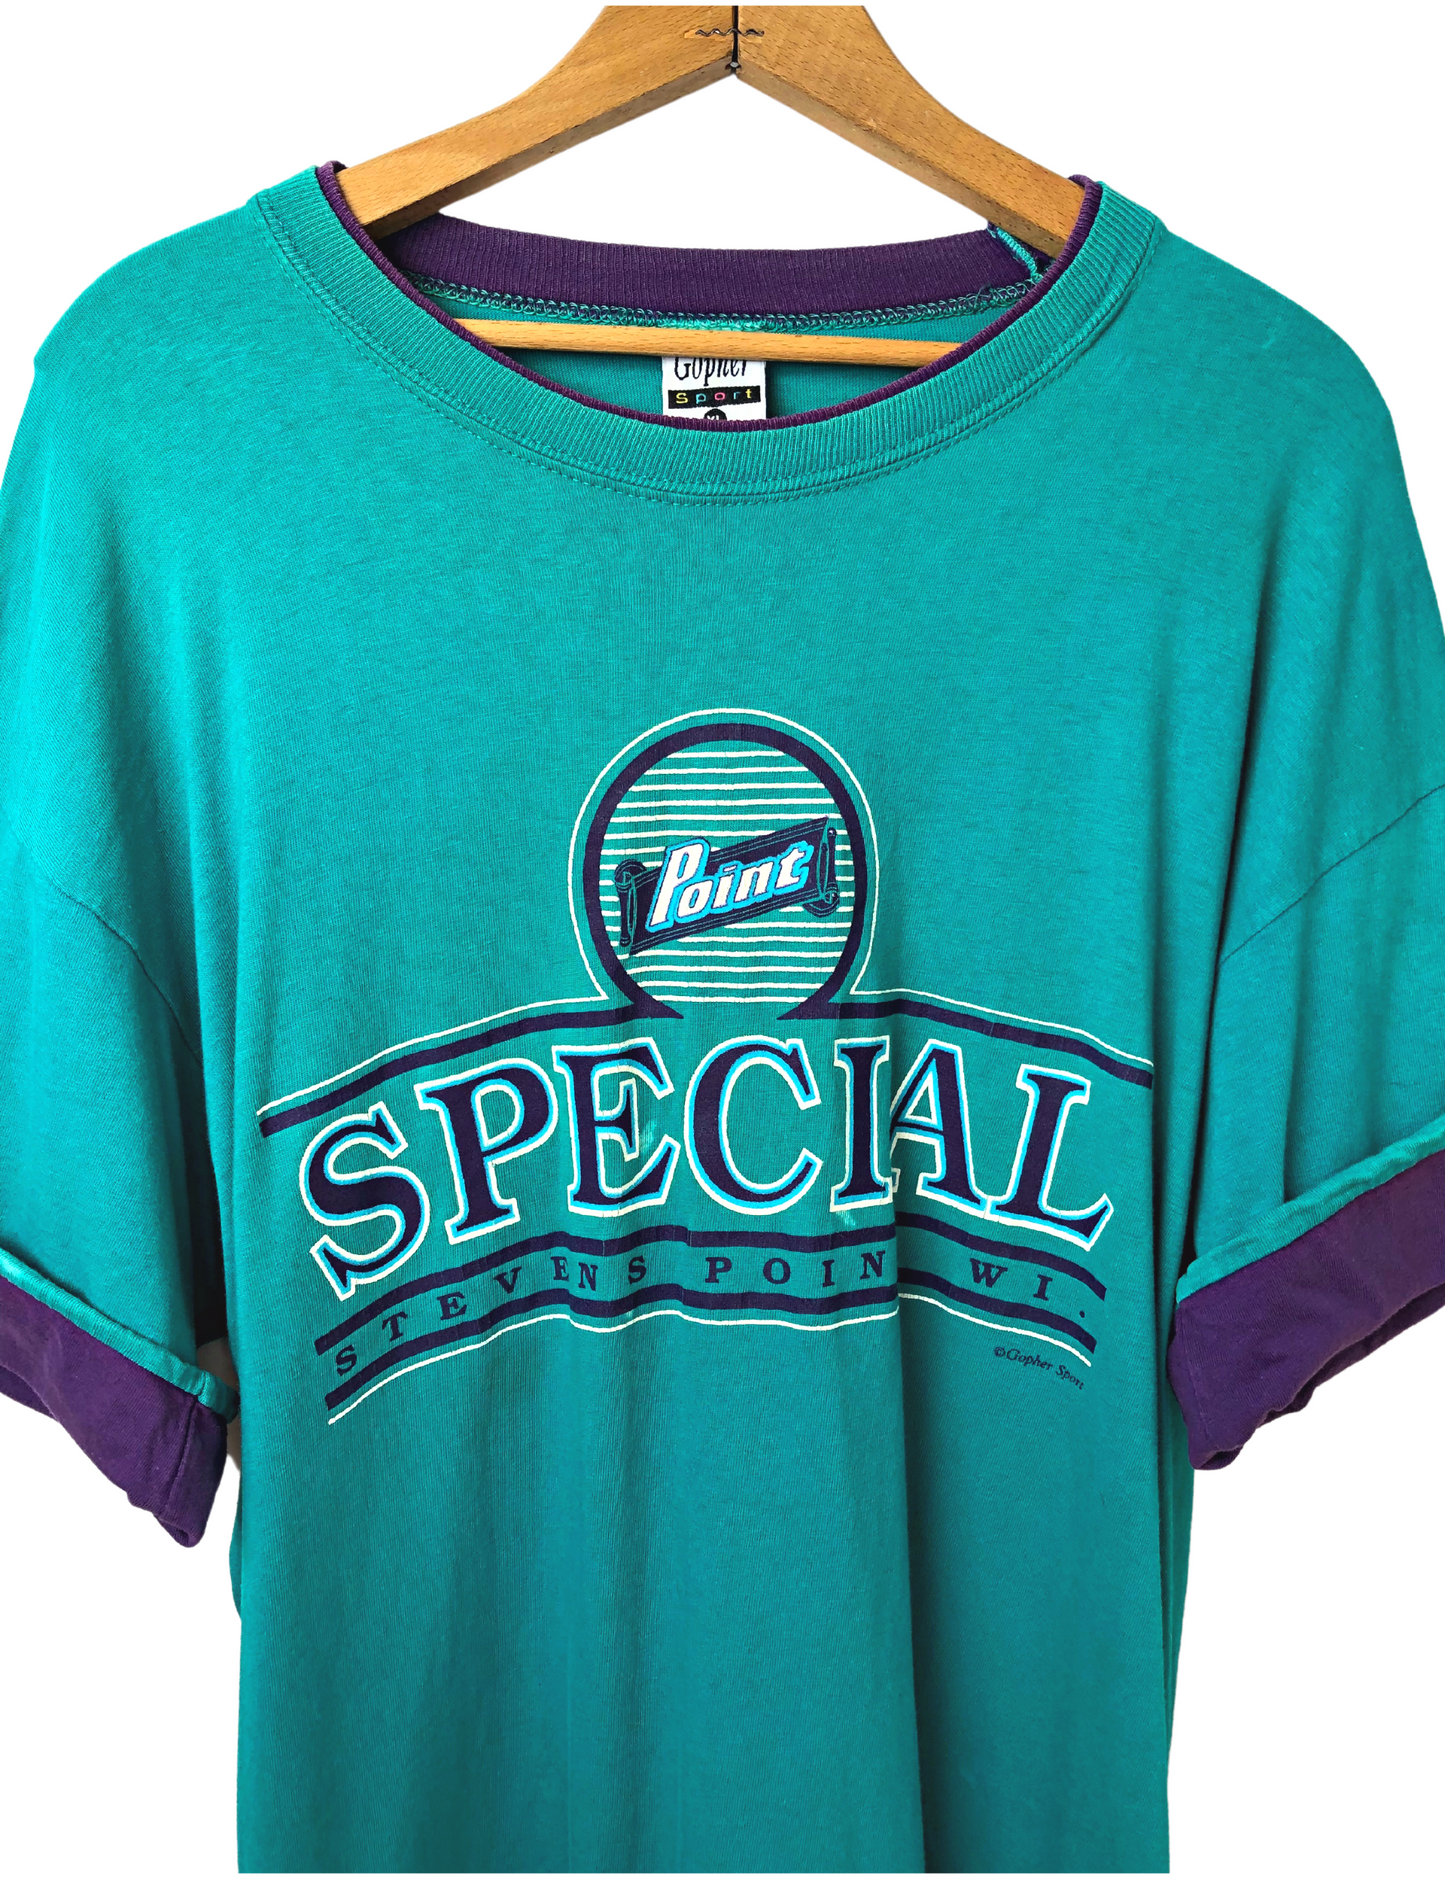 Vintage 80’s Point Special Stevens Point Layered Roll Sleeve T-shirt